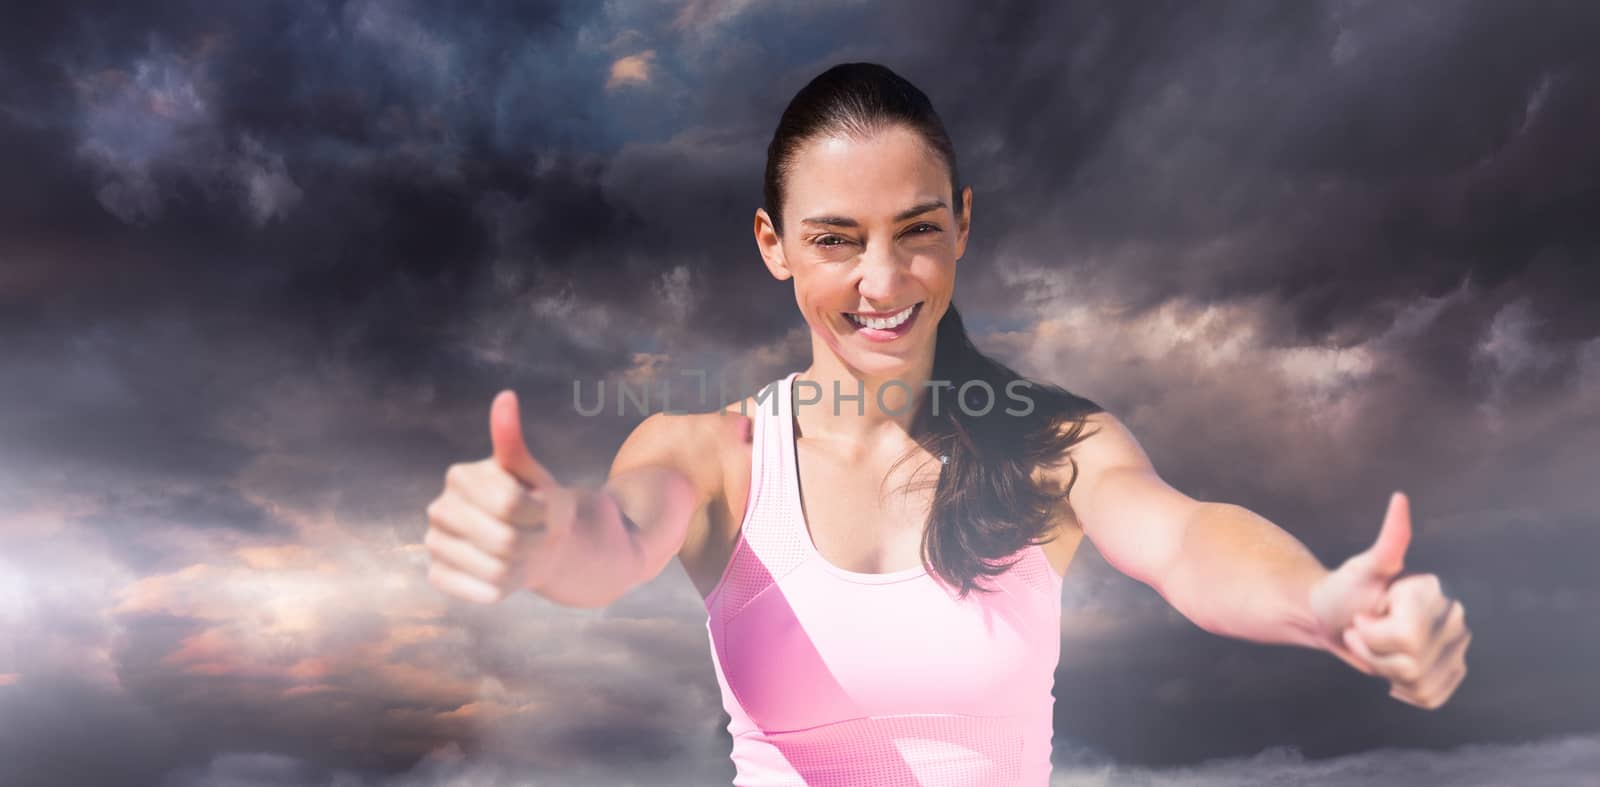 Composite image of portrait of sportswoman is smiling with thumbs up by Wavebreakmedia